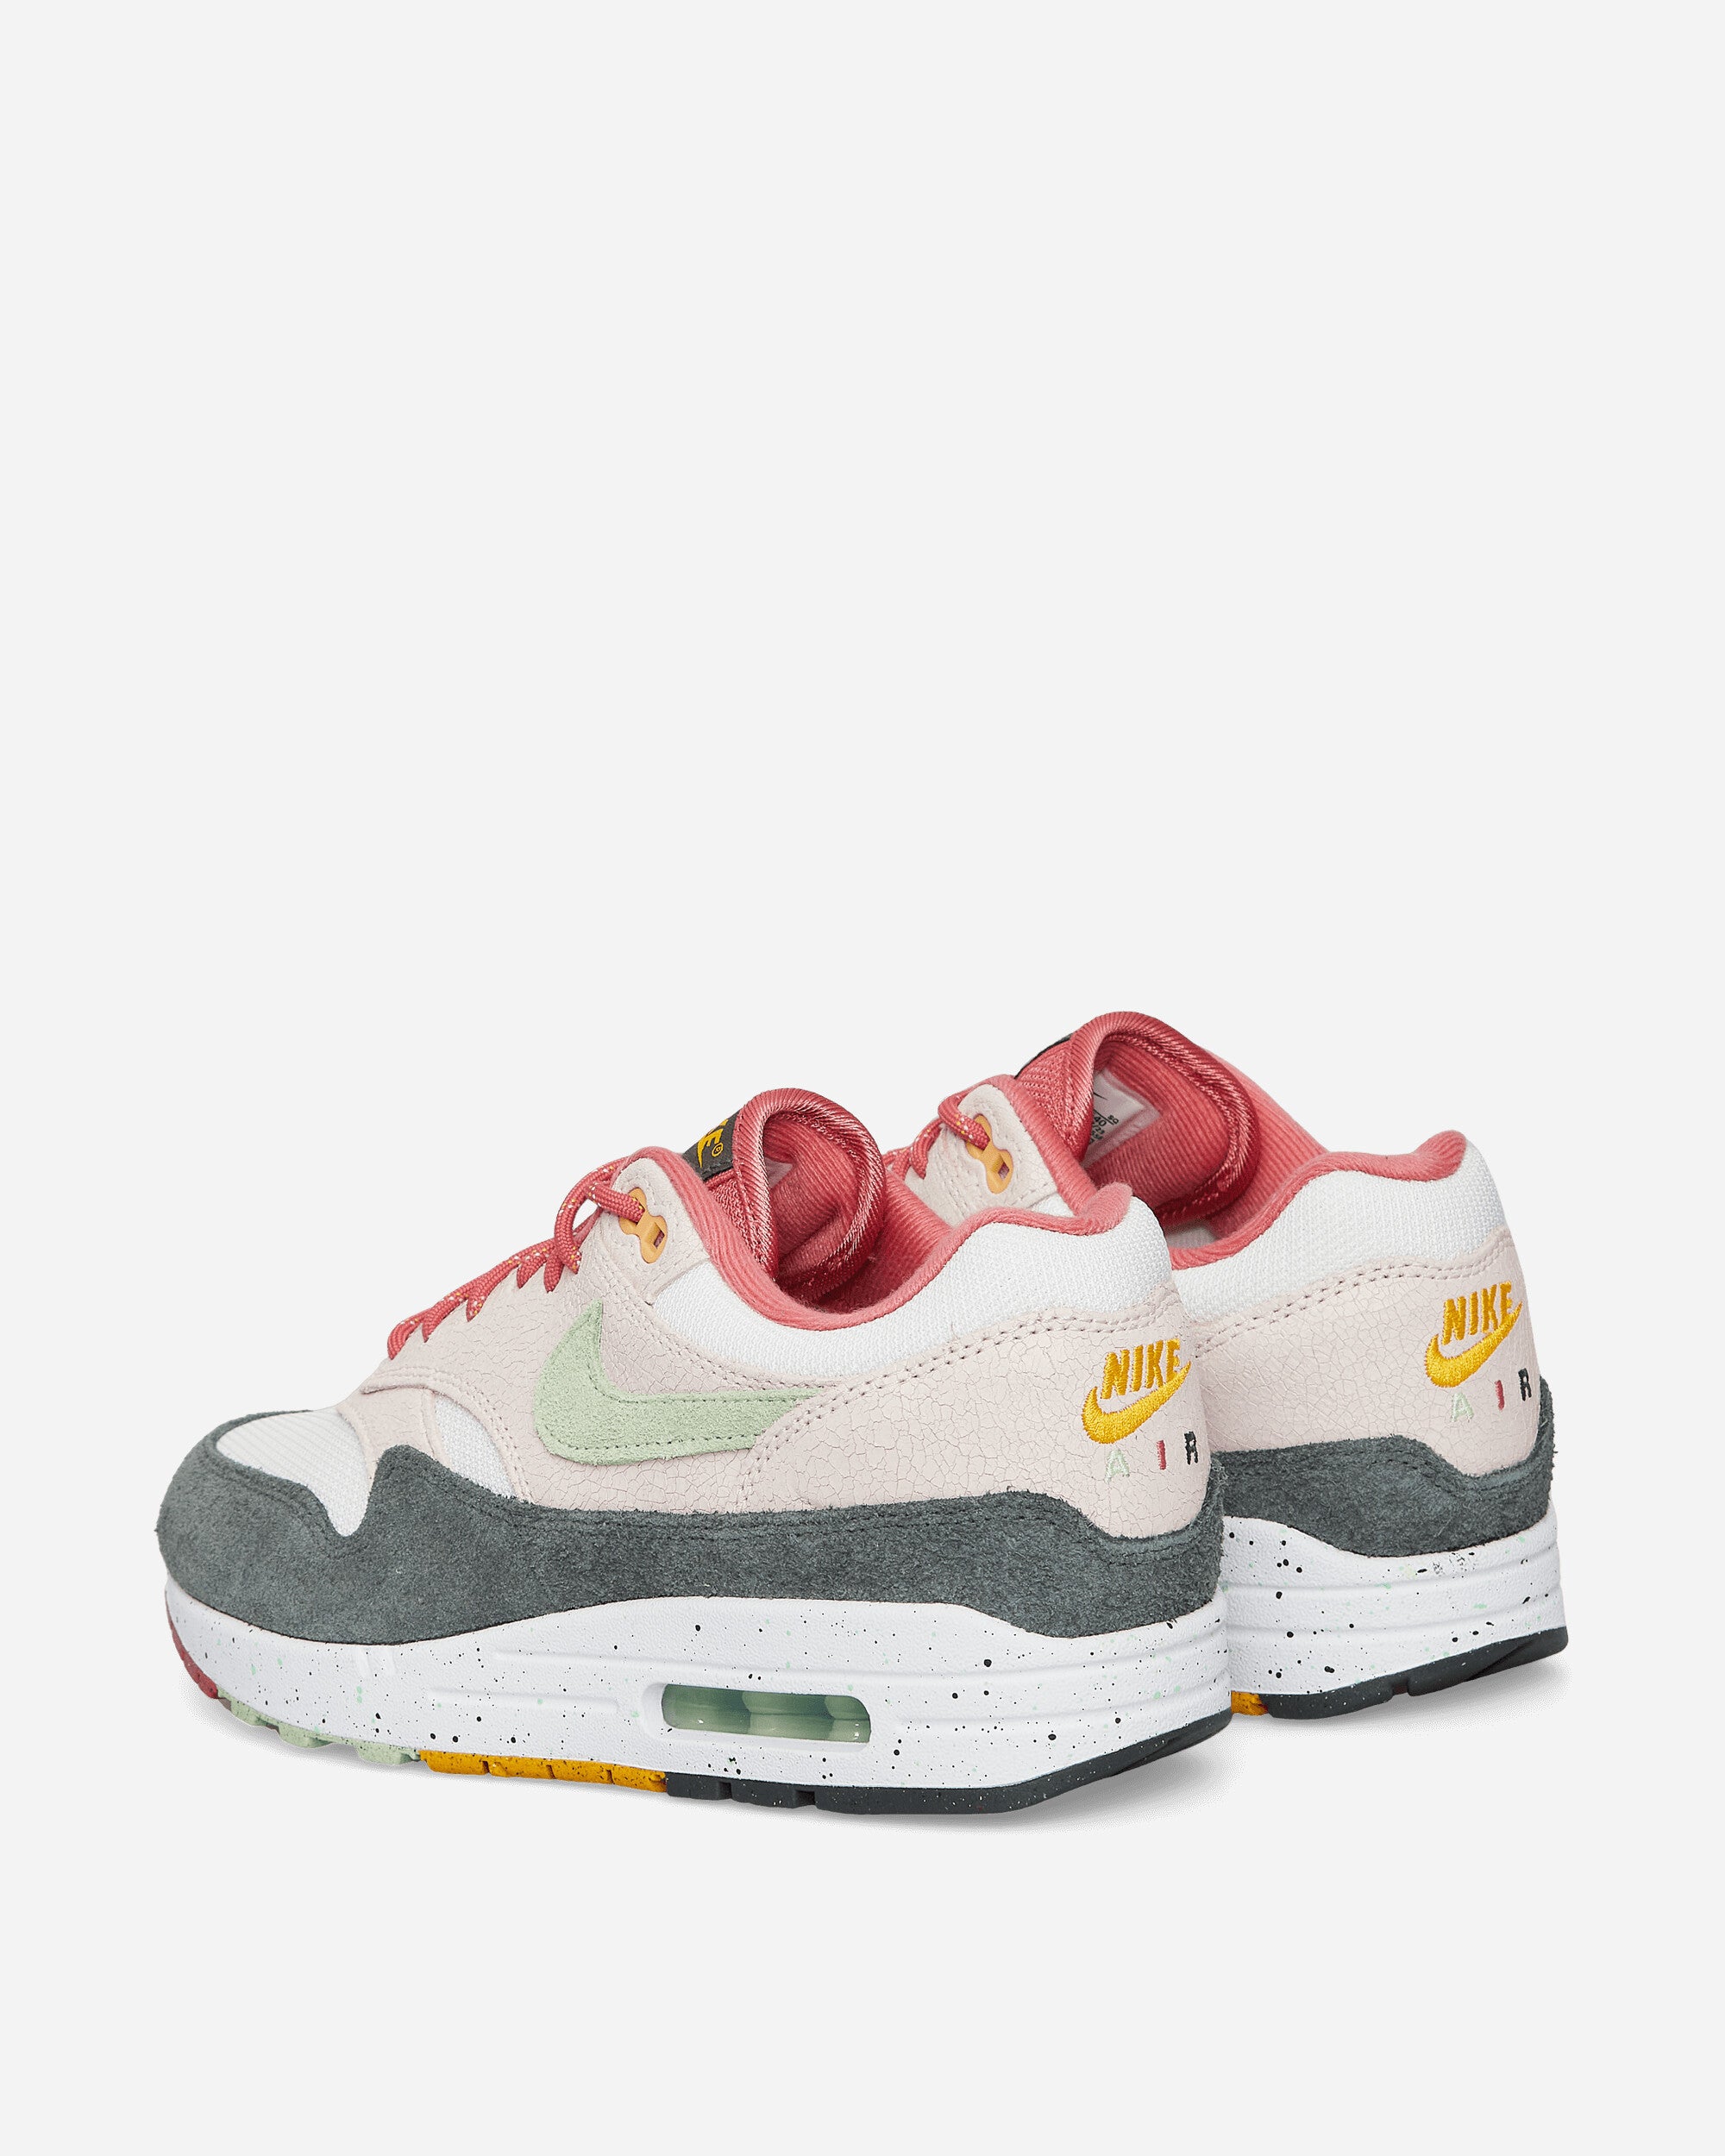 Nike Nike Air Max 1 Light Soft Pink/Green Sneakers Low FZ4133-640